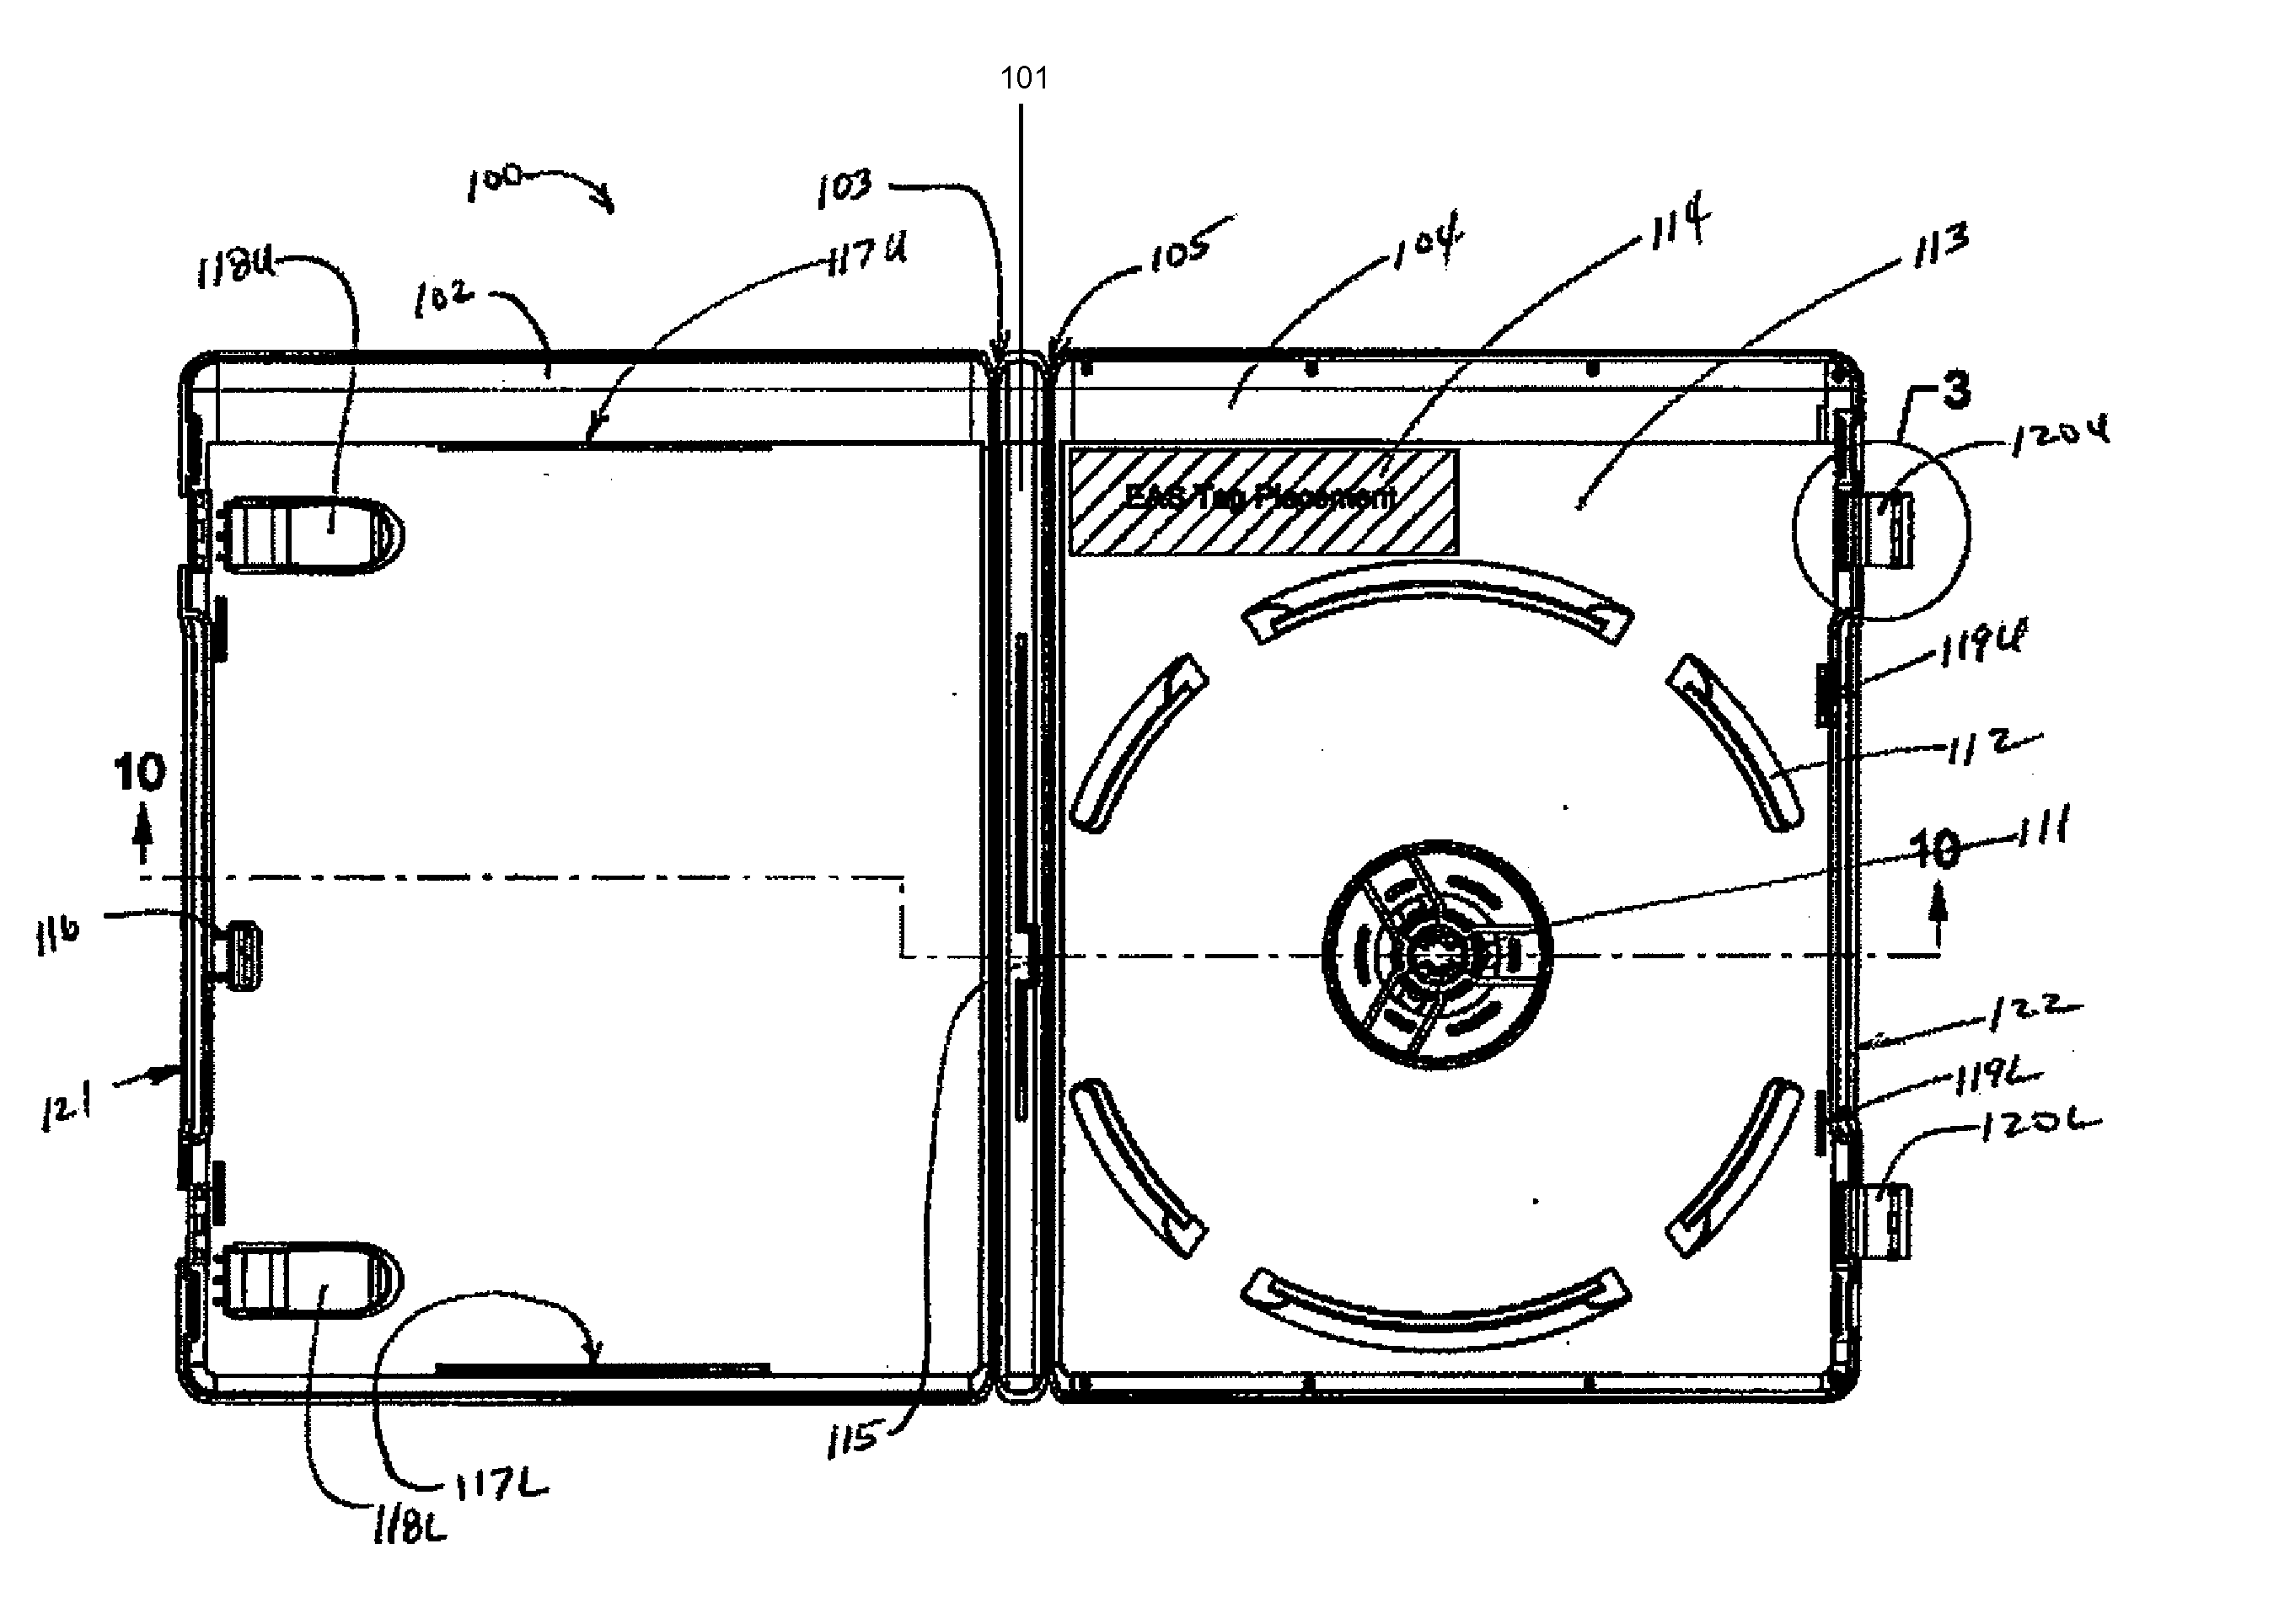 Injection Molded Case for Optical Storage Discs